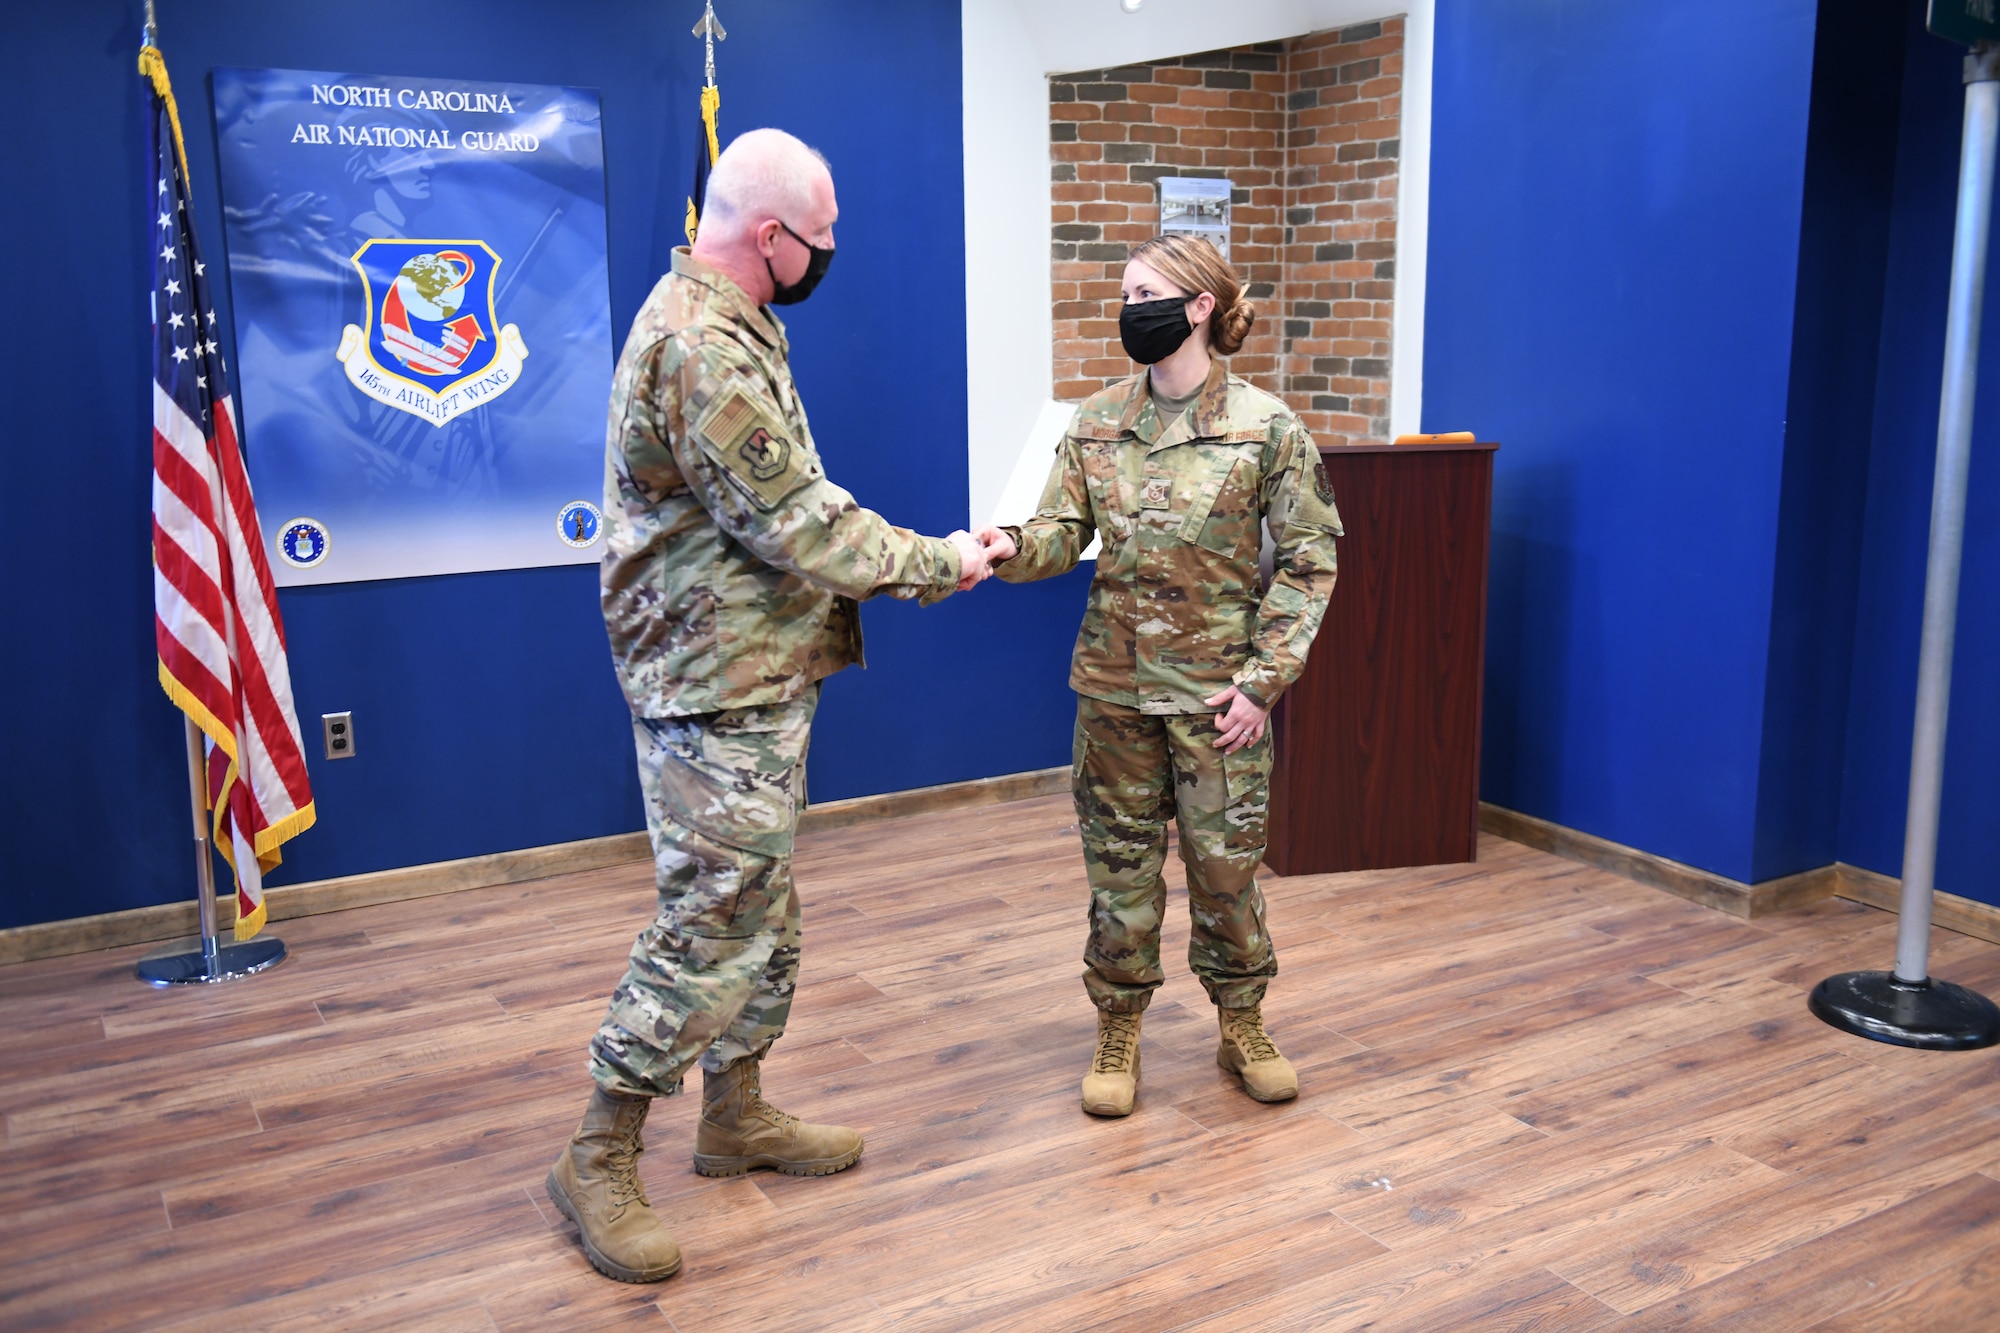 U.S. Air Force Brigadier General Allan R. Cecil North Carolina Air National Guard Chief of Staff (left), presents his coin to TSgt Brittney Morgan, a recruiter with the 145th Airlift Wing at the headquarters building, NCANG Base, Charlotte Douglas International Airport, February 7. 2021. Brigadier General Cecil is presenting TSgt Morgan with a coin in recognition of her outstanding performance as a recruiter, going above her yearly recruiting goal by 147% during 2020.